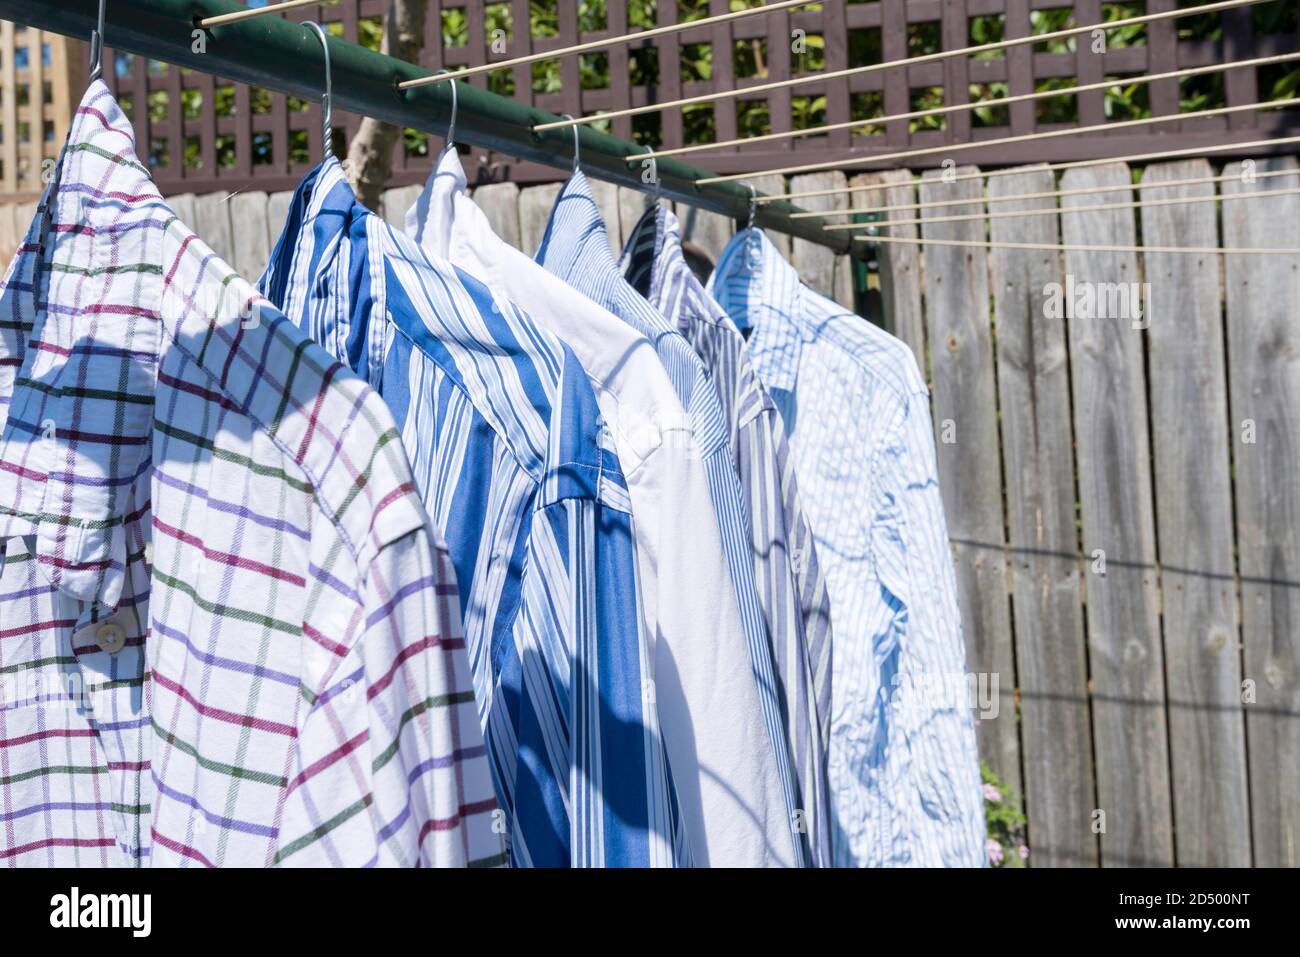 https://c8.alamy.com/comp/2D500NT/a-collection-of-colourful-business-shirts-hanging-with-coat-hangers-on-a-washing-or-clothes-line-in-the-australian-sun-2D500NT.jpg